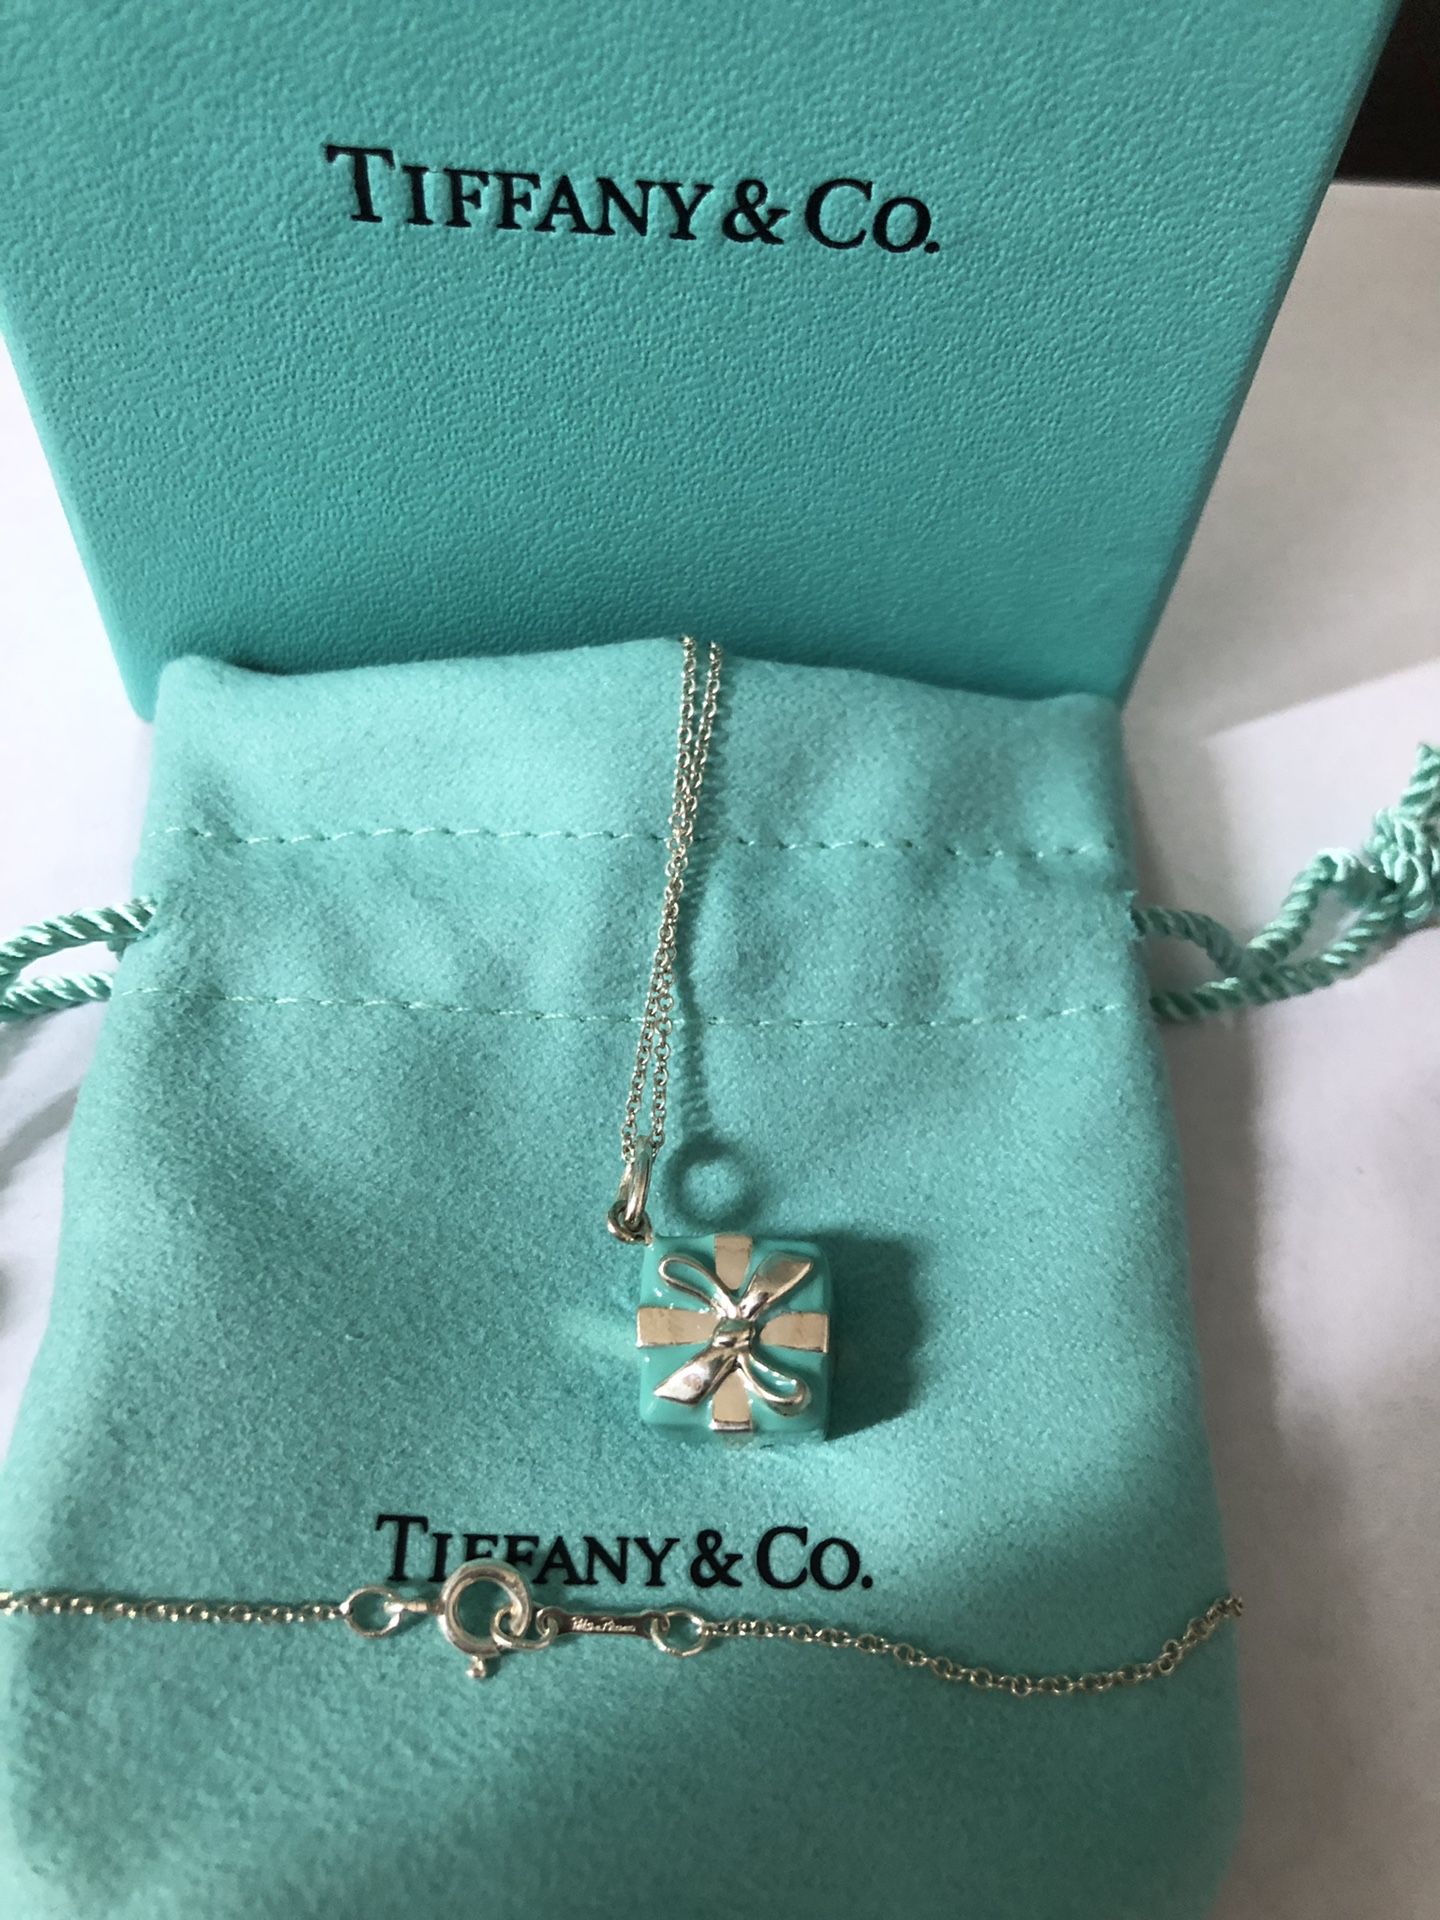 Tiffany & Co Silver Blue Enamel Signature Gift Box Necklace Pendant Gift Pouch